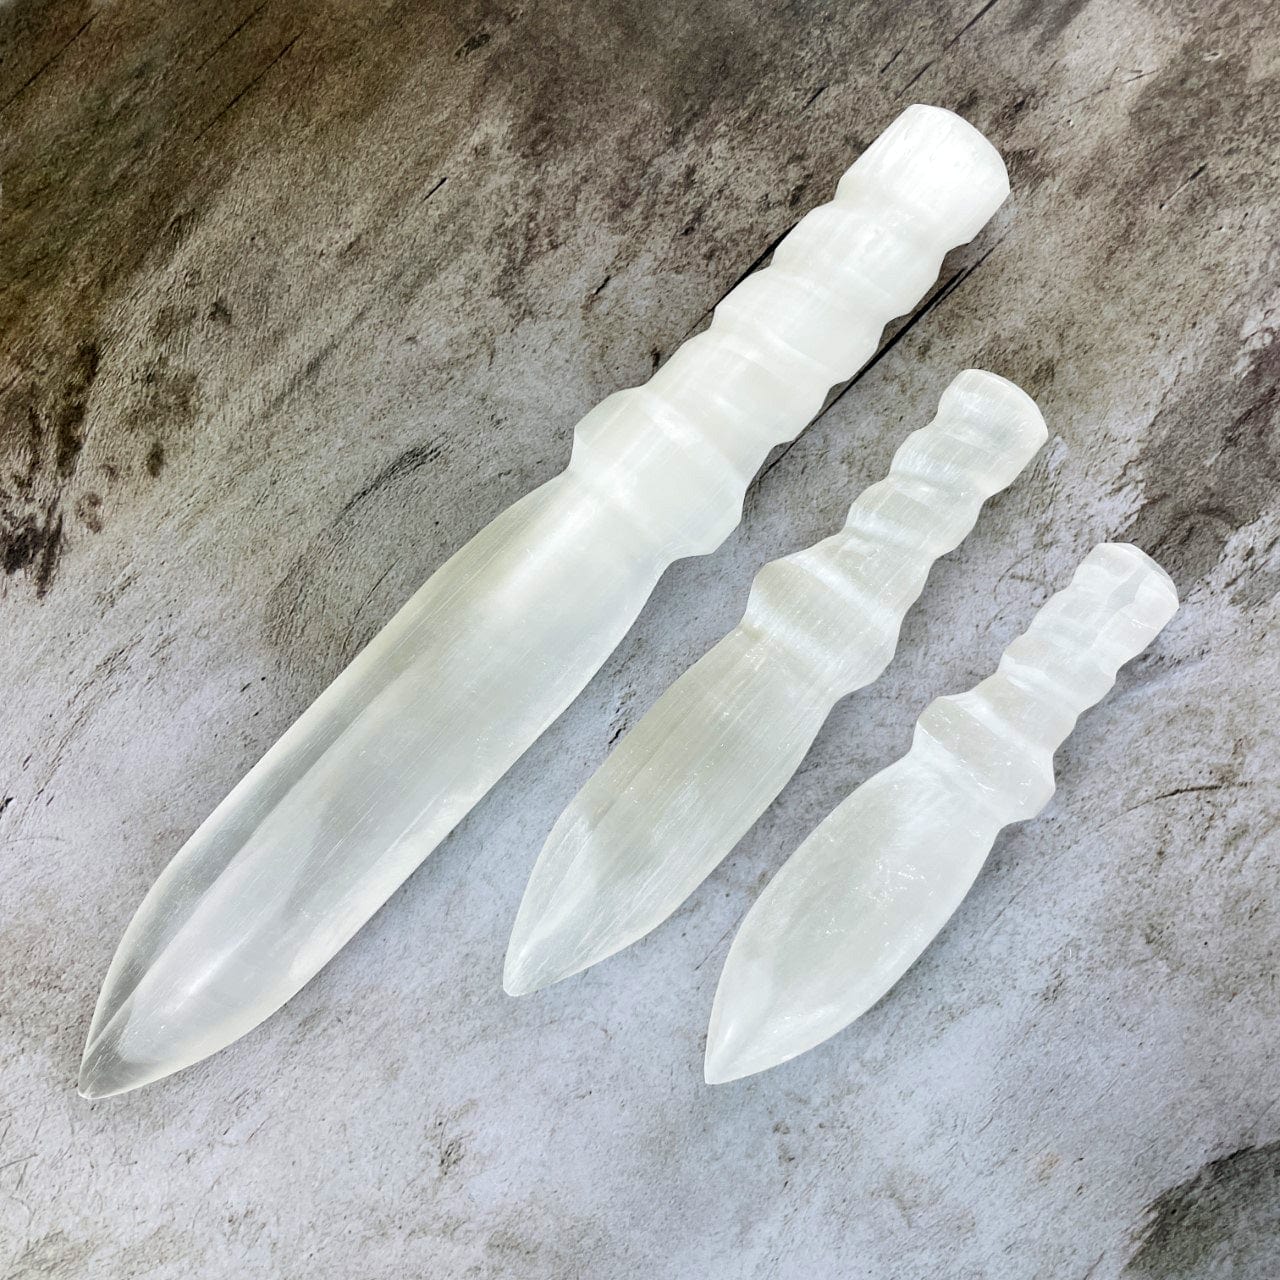 3 sizes of Selenite Knives with Twisted Handles